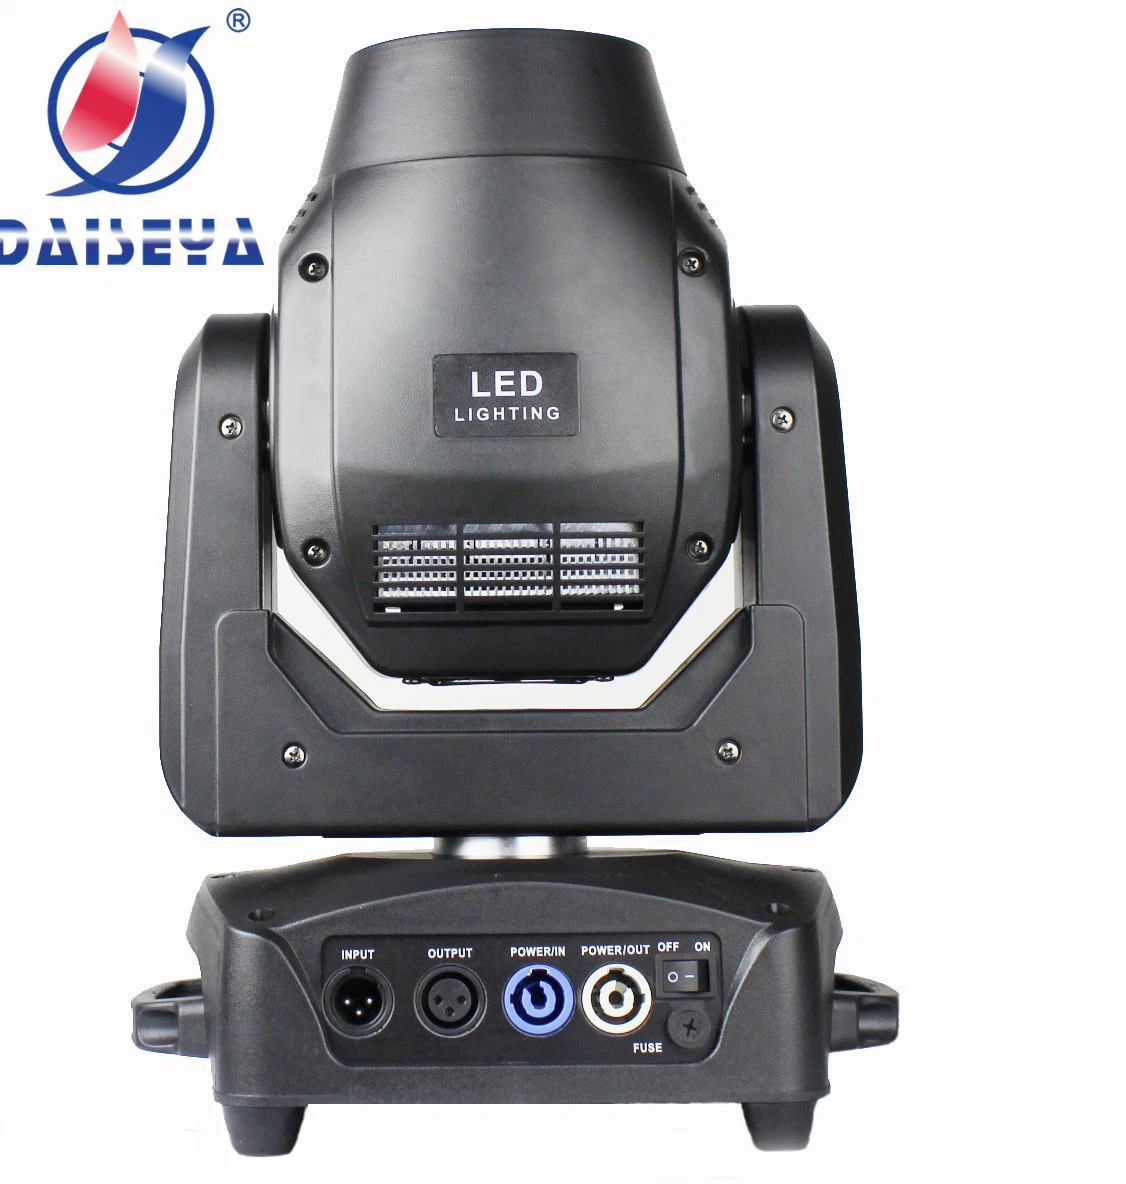 Hot-Sale Beam/Spot/Wash Bsw 3in1 Hybrid 200W LED Moving Head for DJ Stage Lighting